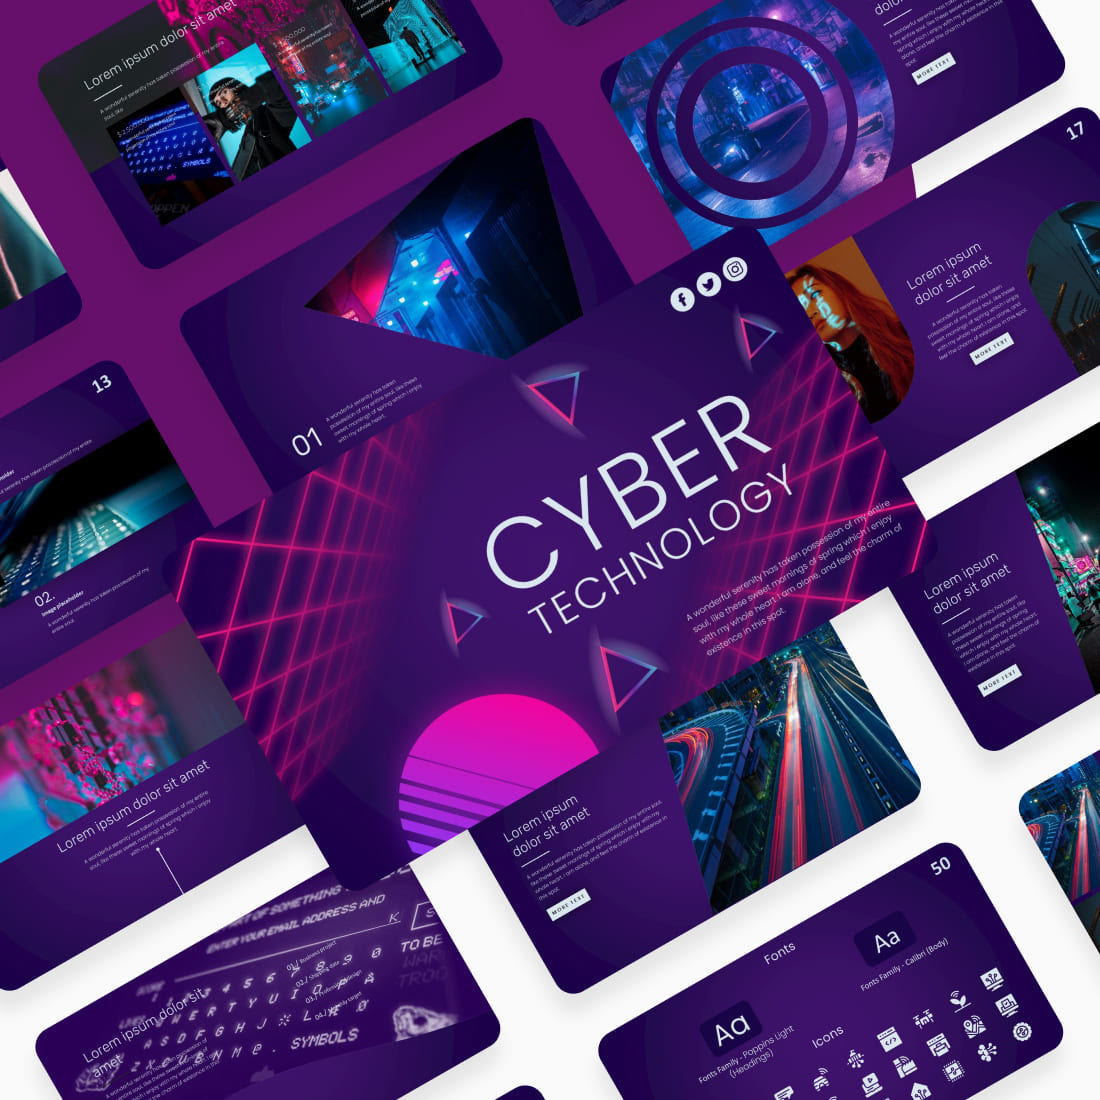 Cyber Technology PowerPoint Template cover image.